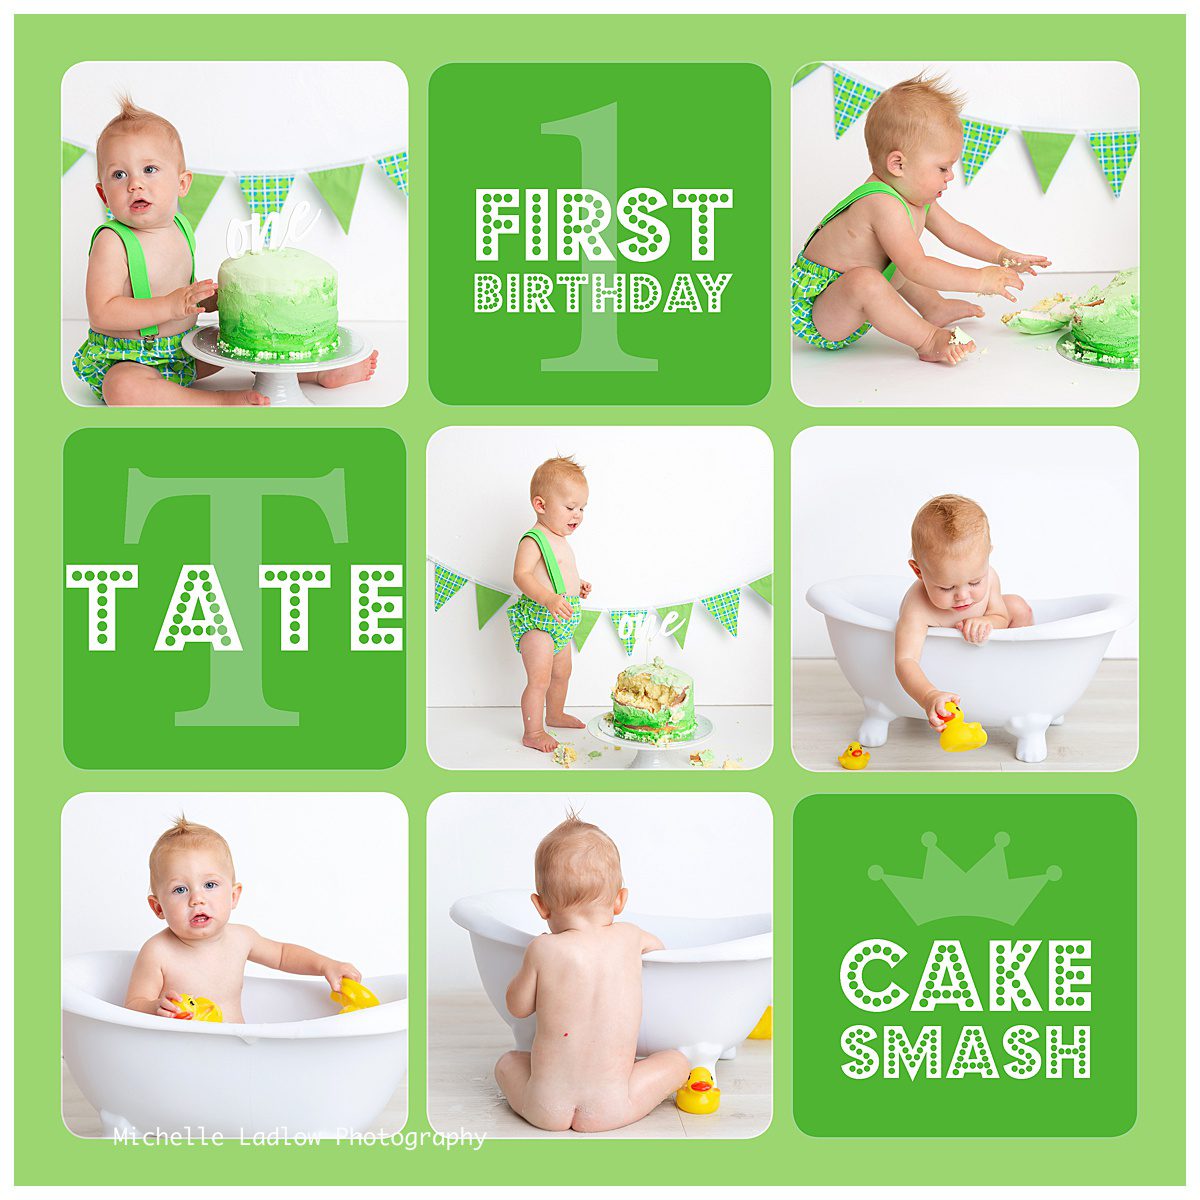 Cake Smash Template,12x12,Storyboard,Template,Photographer Template,Design Templates,Storyboards,Cake Smash template,Storyboard template,Facebook Timeline Cover Designs,Templates for Photographers,